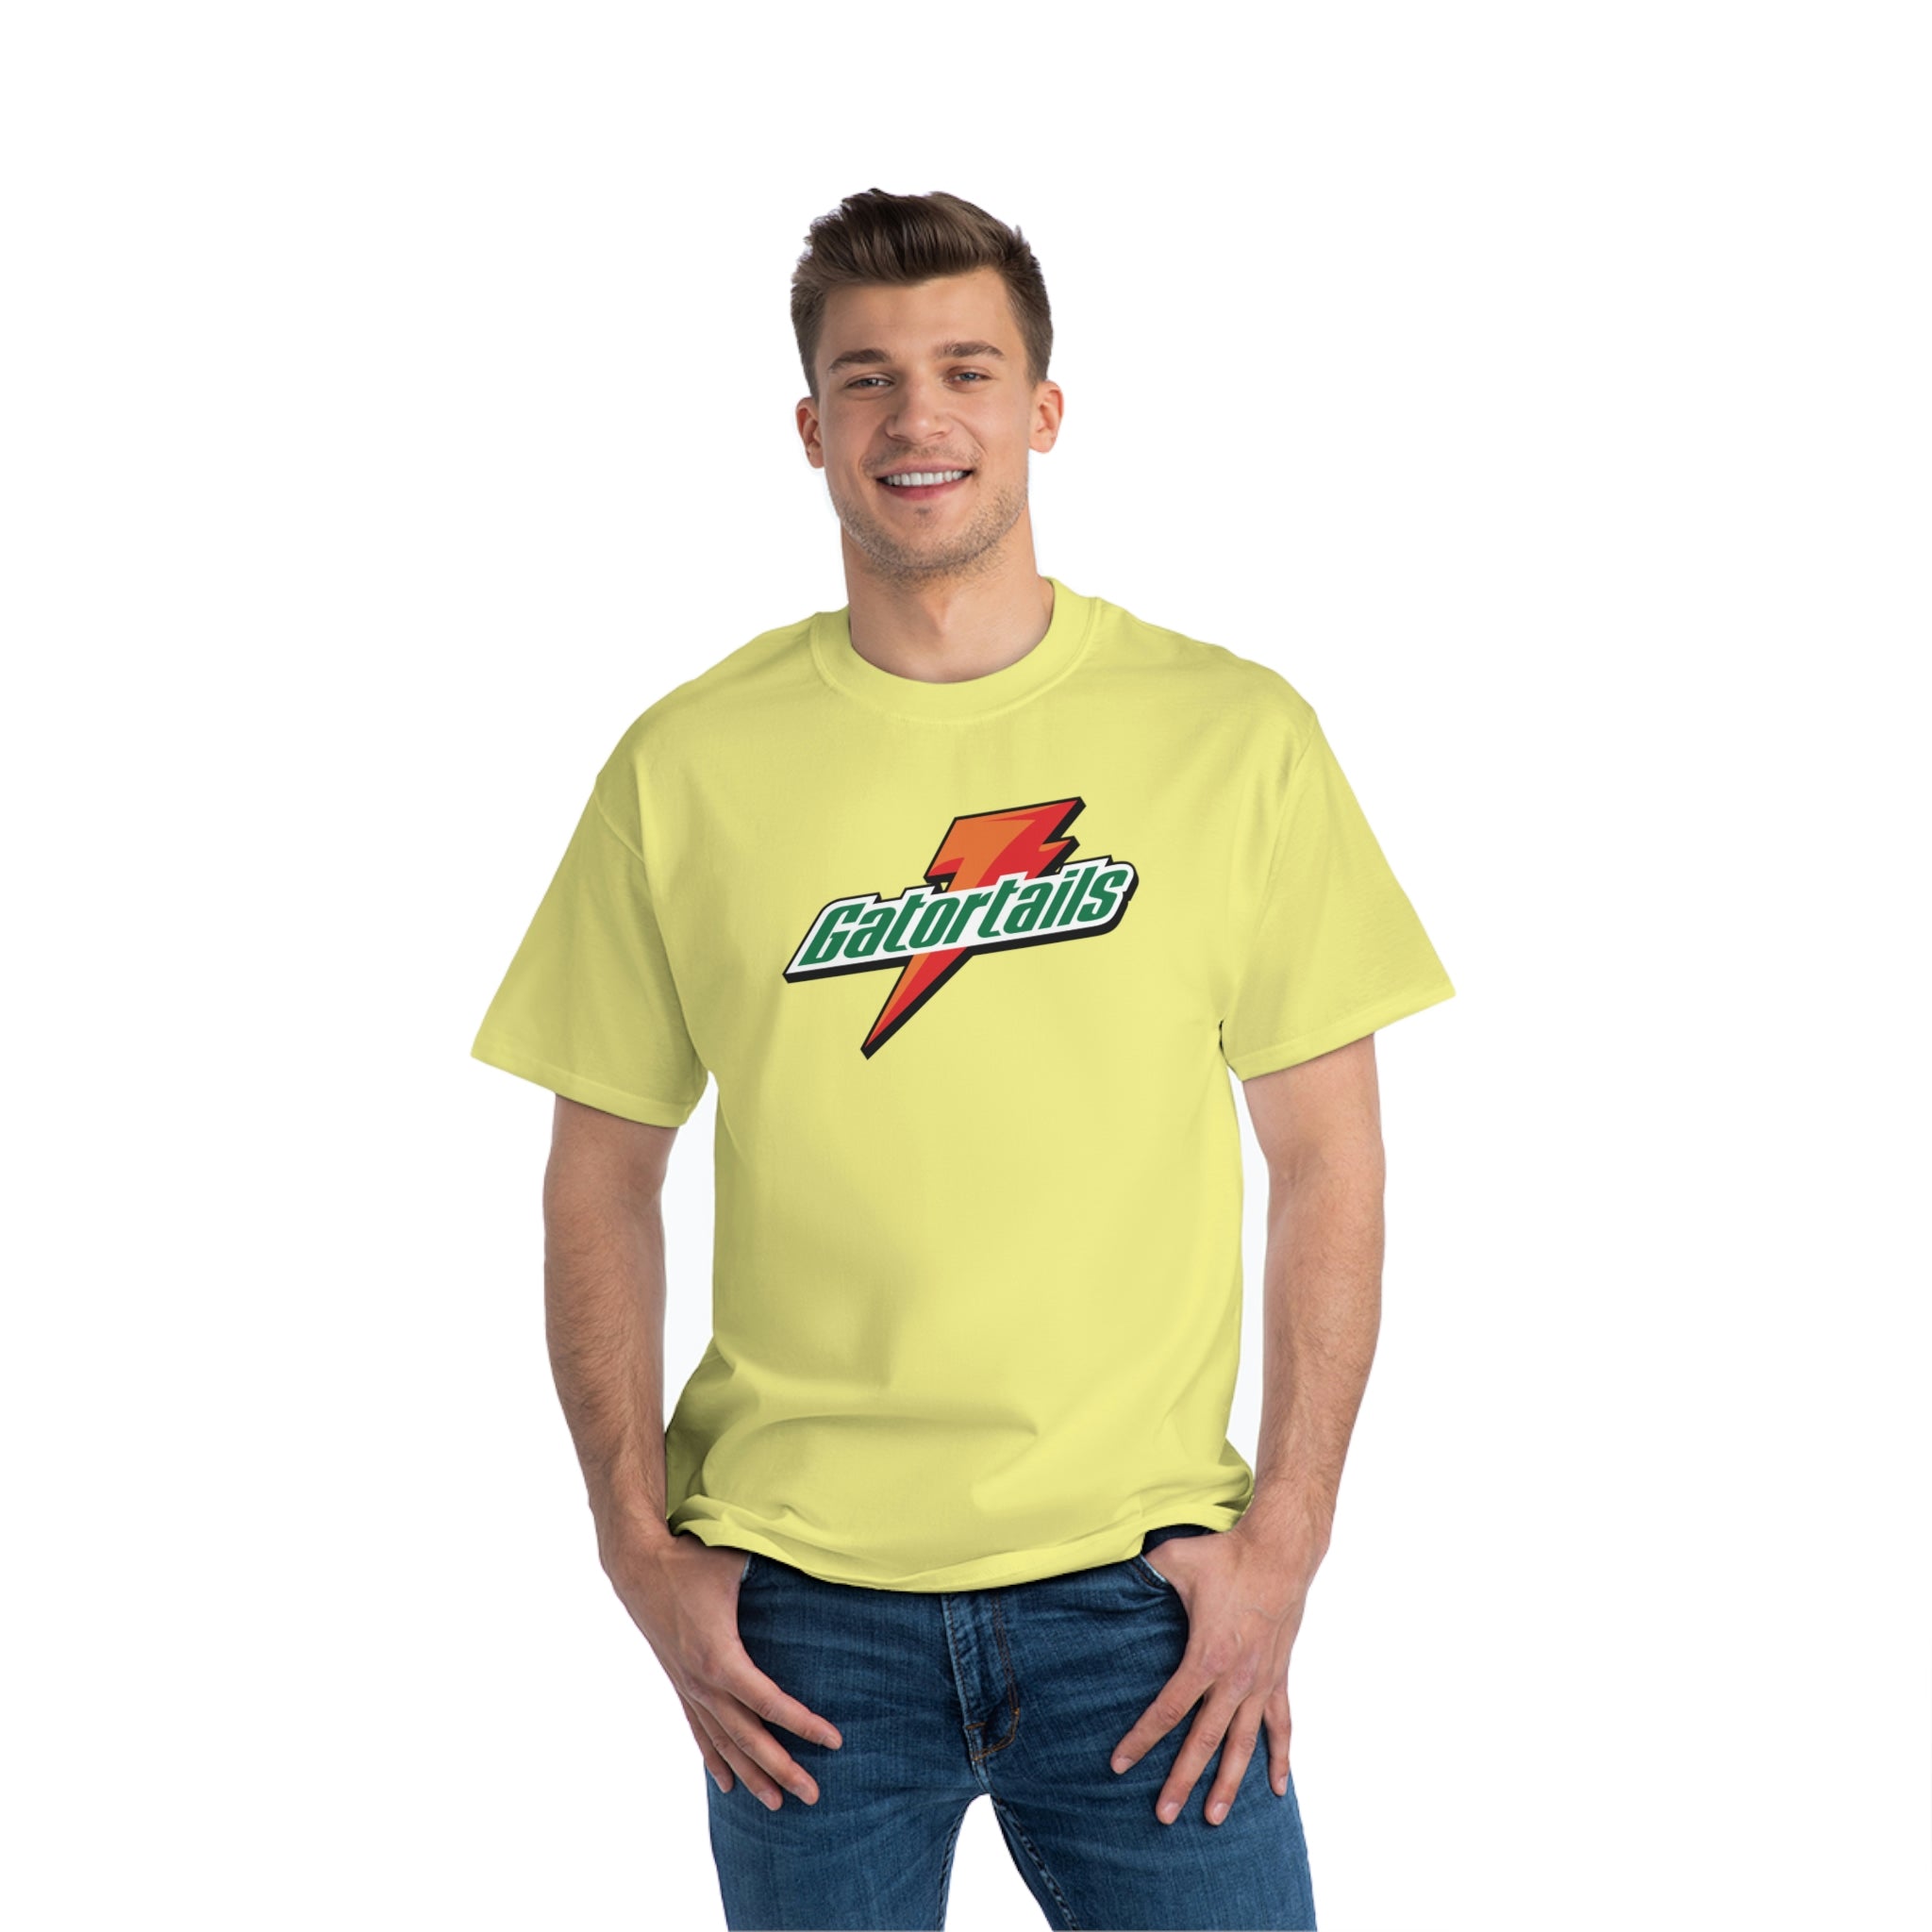 Thirst Quencher Tee